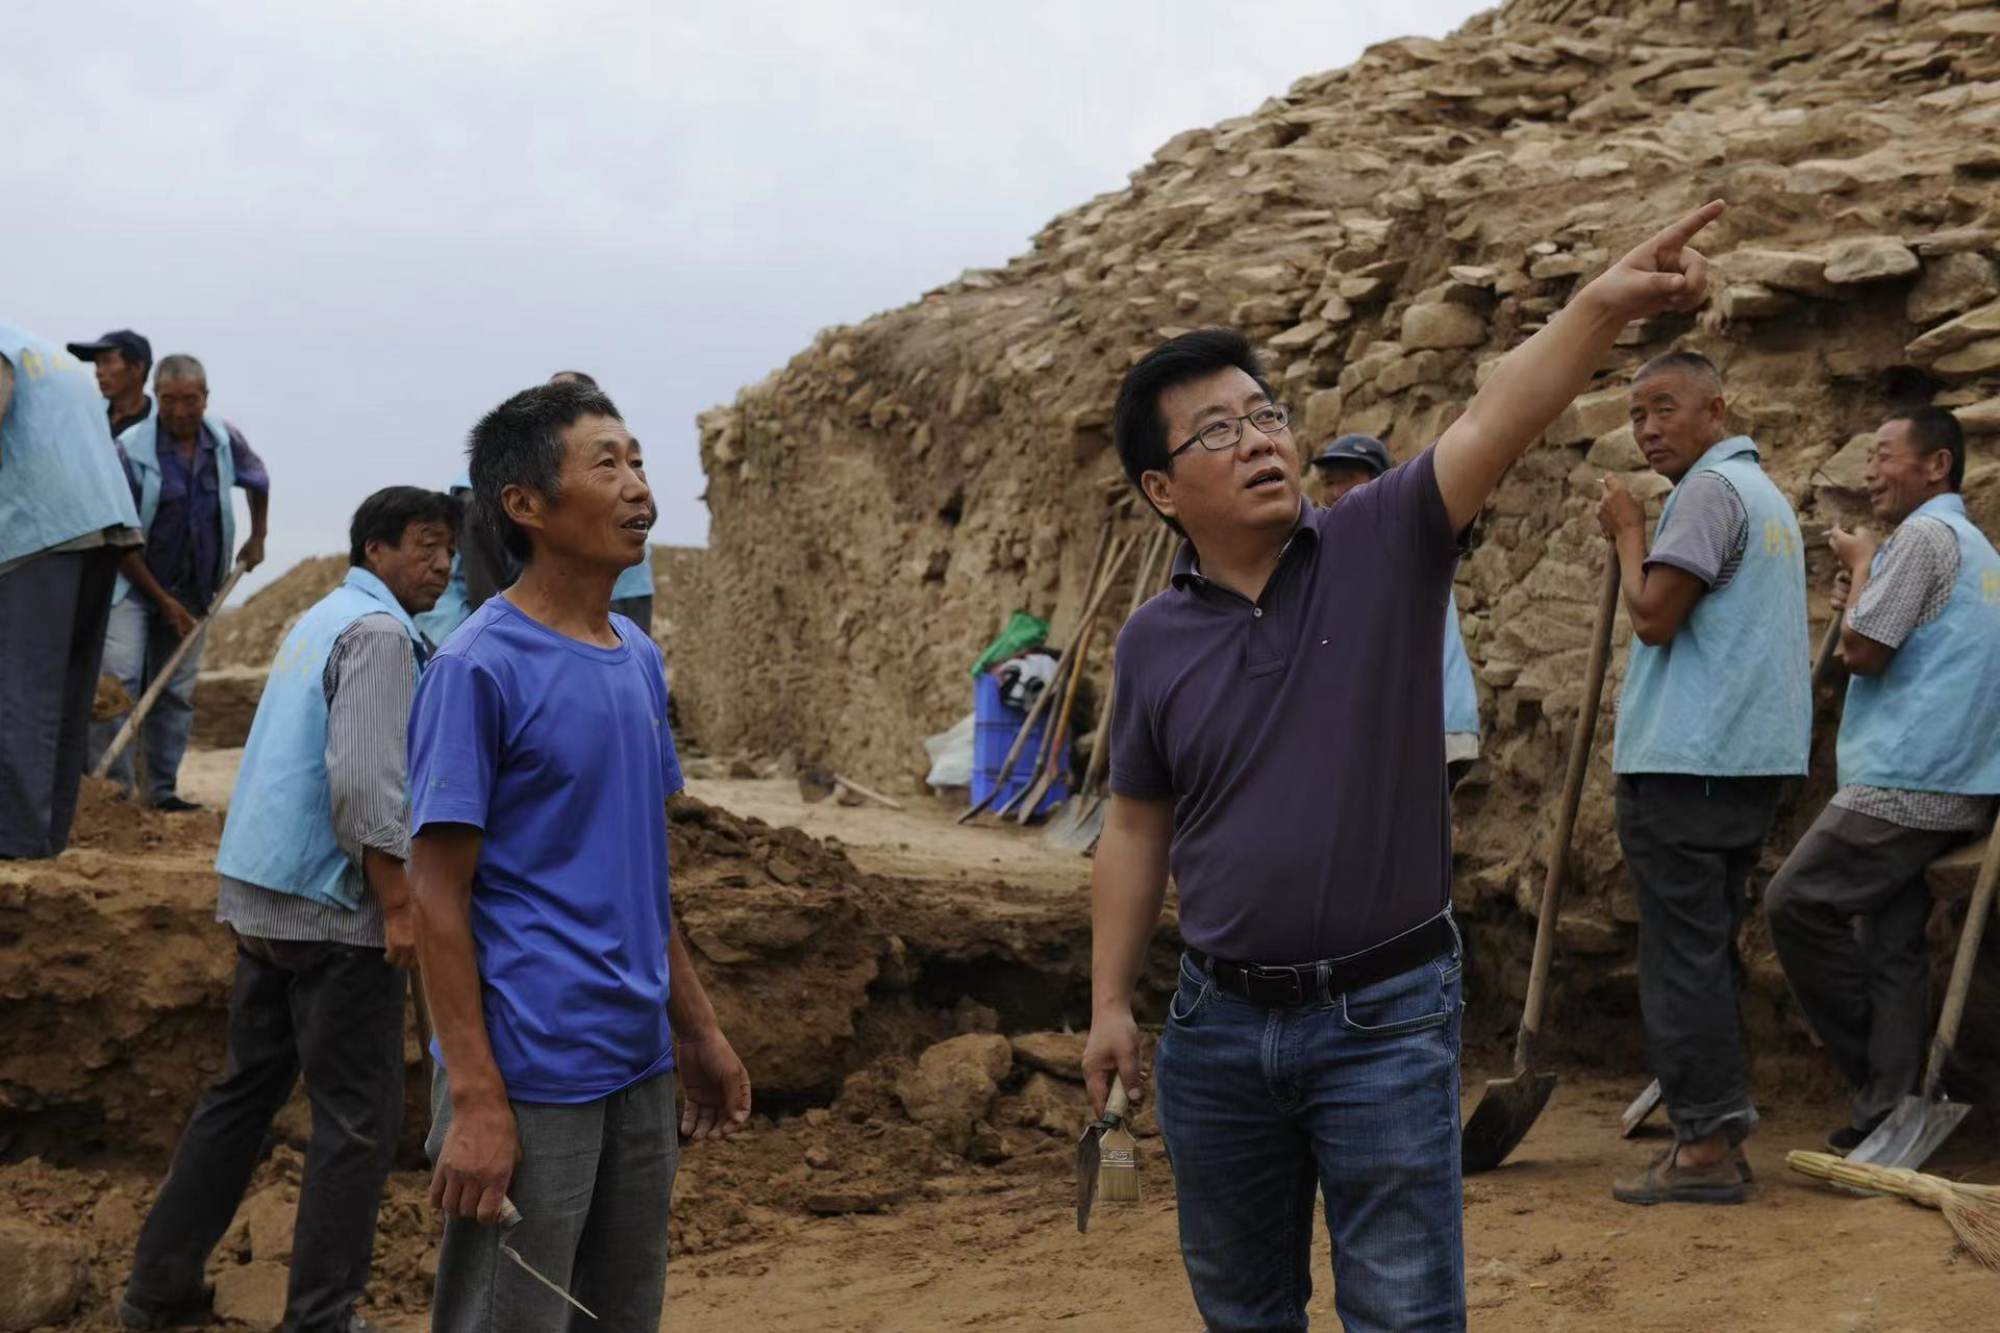 Sun Zhouyong (right) from the Shaanxi Academy of Archaeology, who leads the Shimao team. Photo: Handout